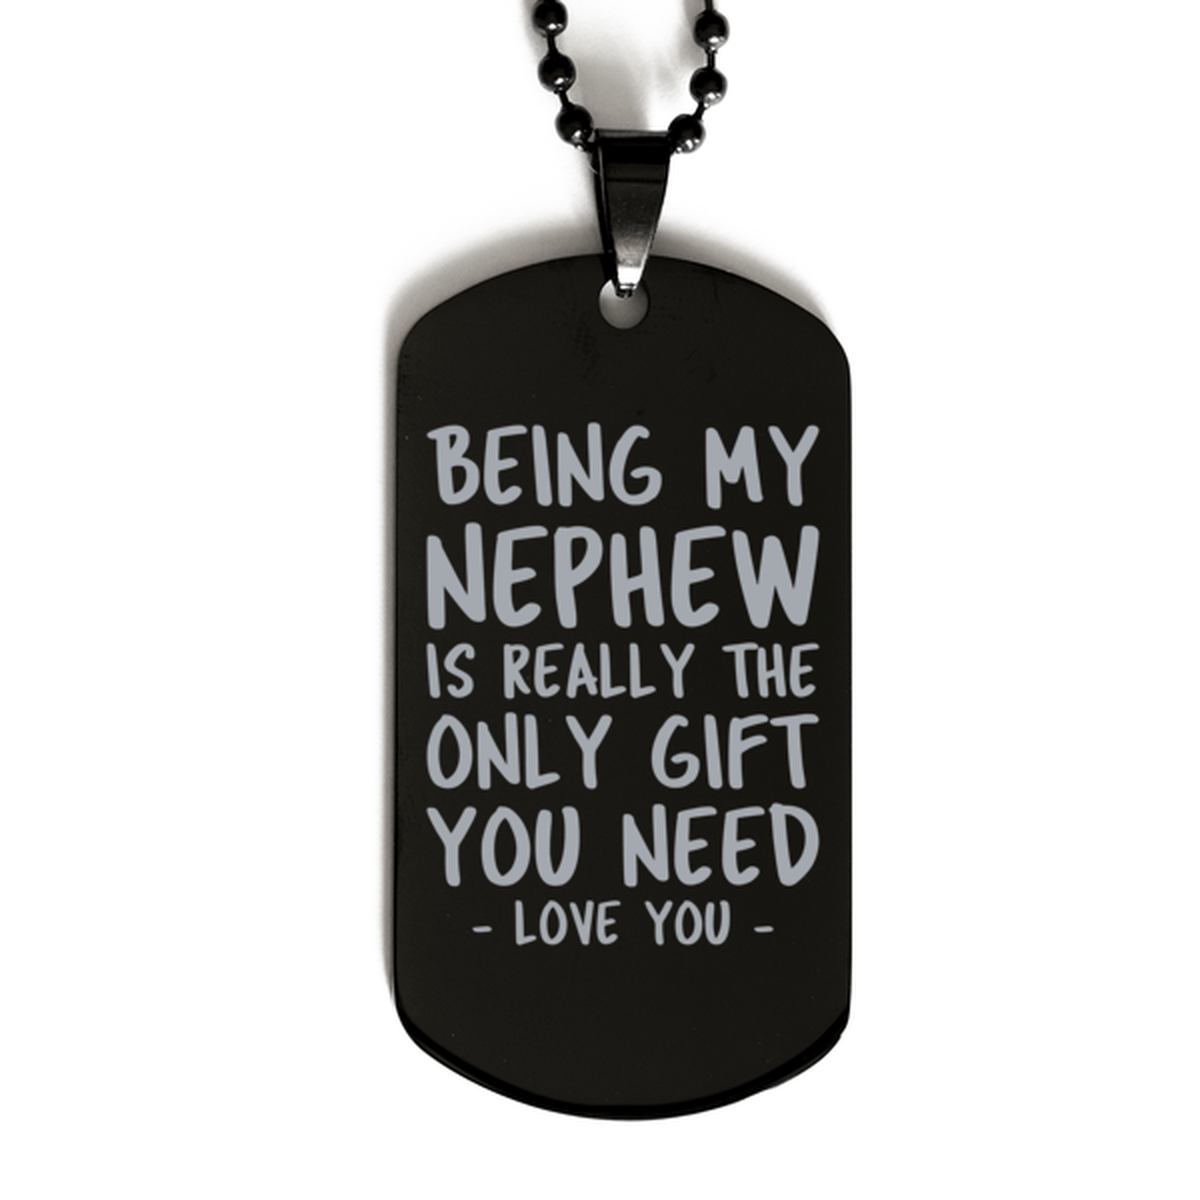 Funny Nephew Black Dog Tag Necklace, Being My Nephew Is Really the Only Gift You Need, Best Birthday Gifts for Nephew